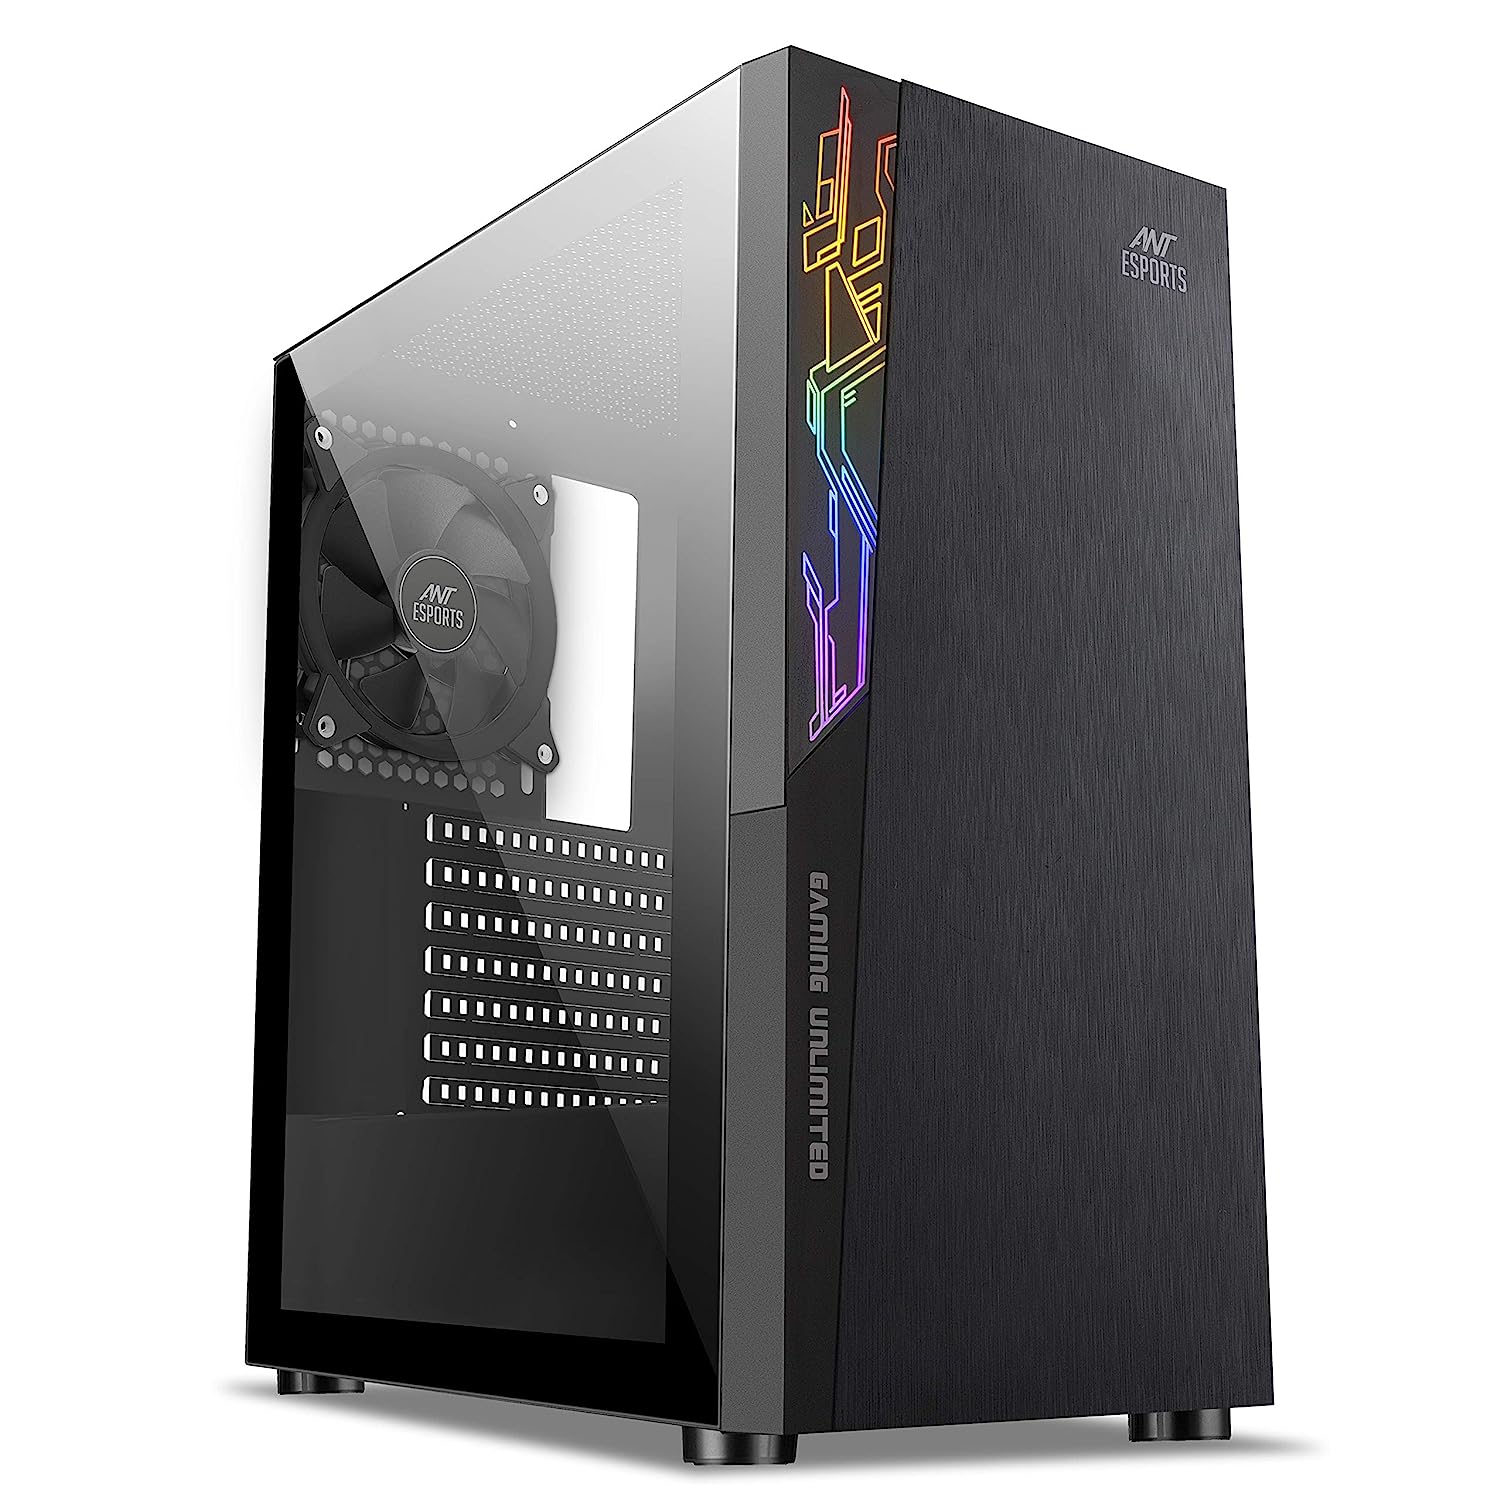 Ant Esports ICE-120AG Mid Tower Computer Case I Gaming Cabinet Supports ATX, Micro-ATX, Mini-ITX Motherboard with 1 x 120 mm Rear Fan Preinstalled - Black-Cabinets-antesports-computerspace